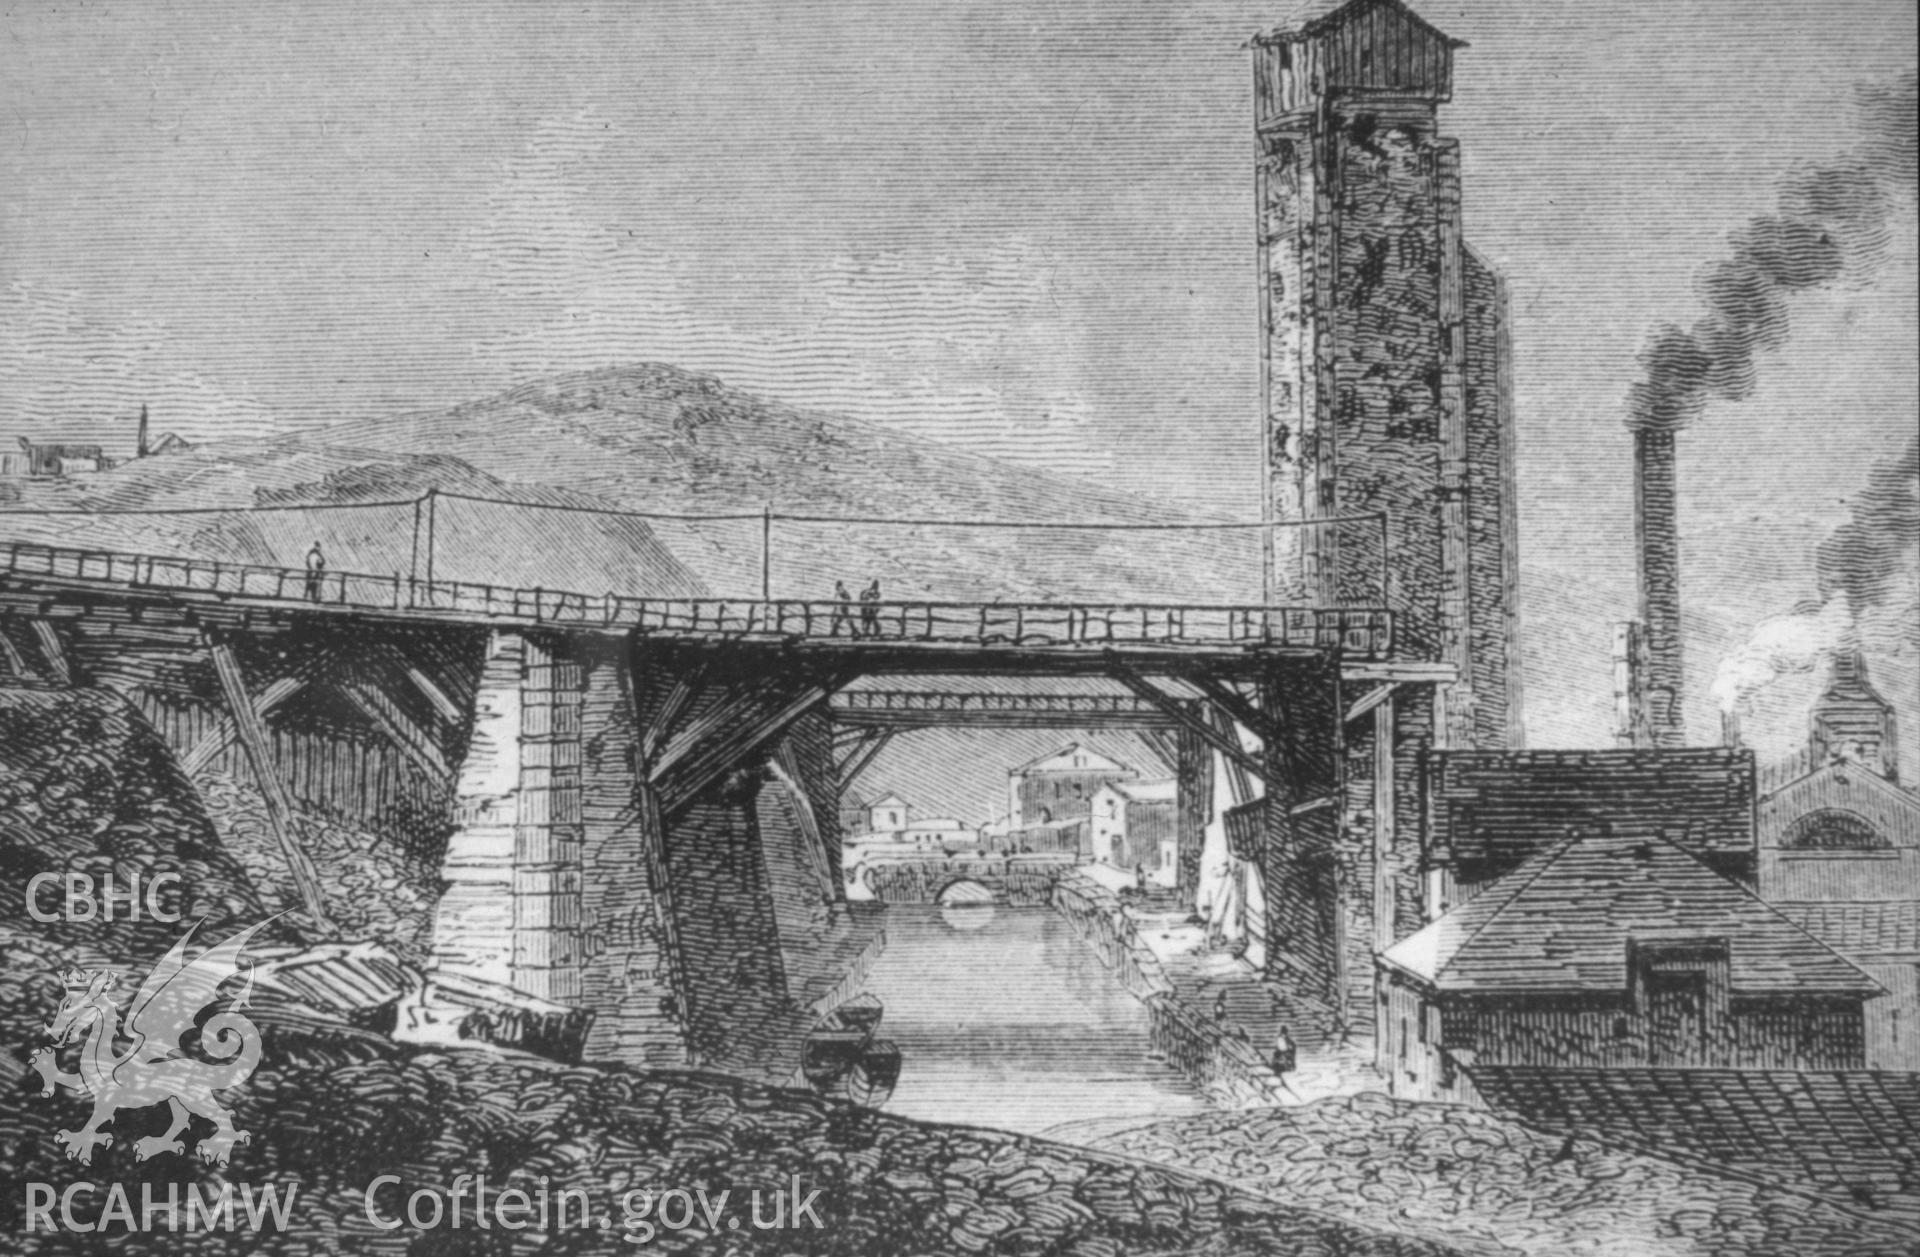 View of Swansea Canal at Hafod Copperworks, copied from an engraving published in Le Tour de Monde, c.1860.